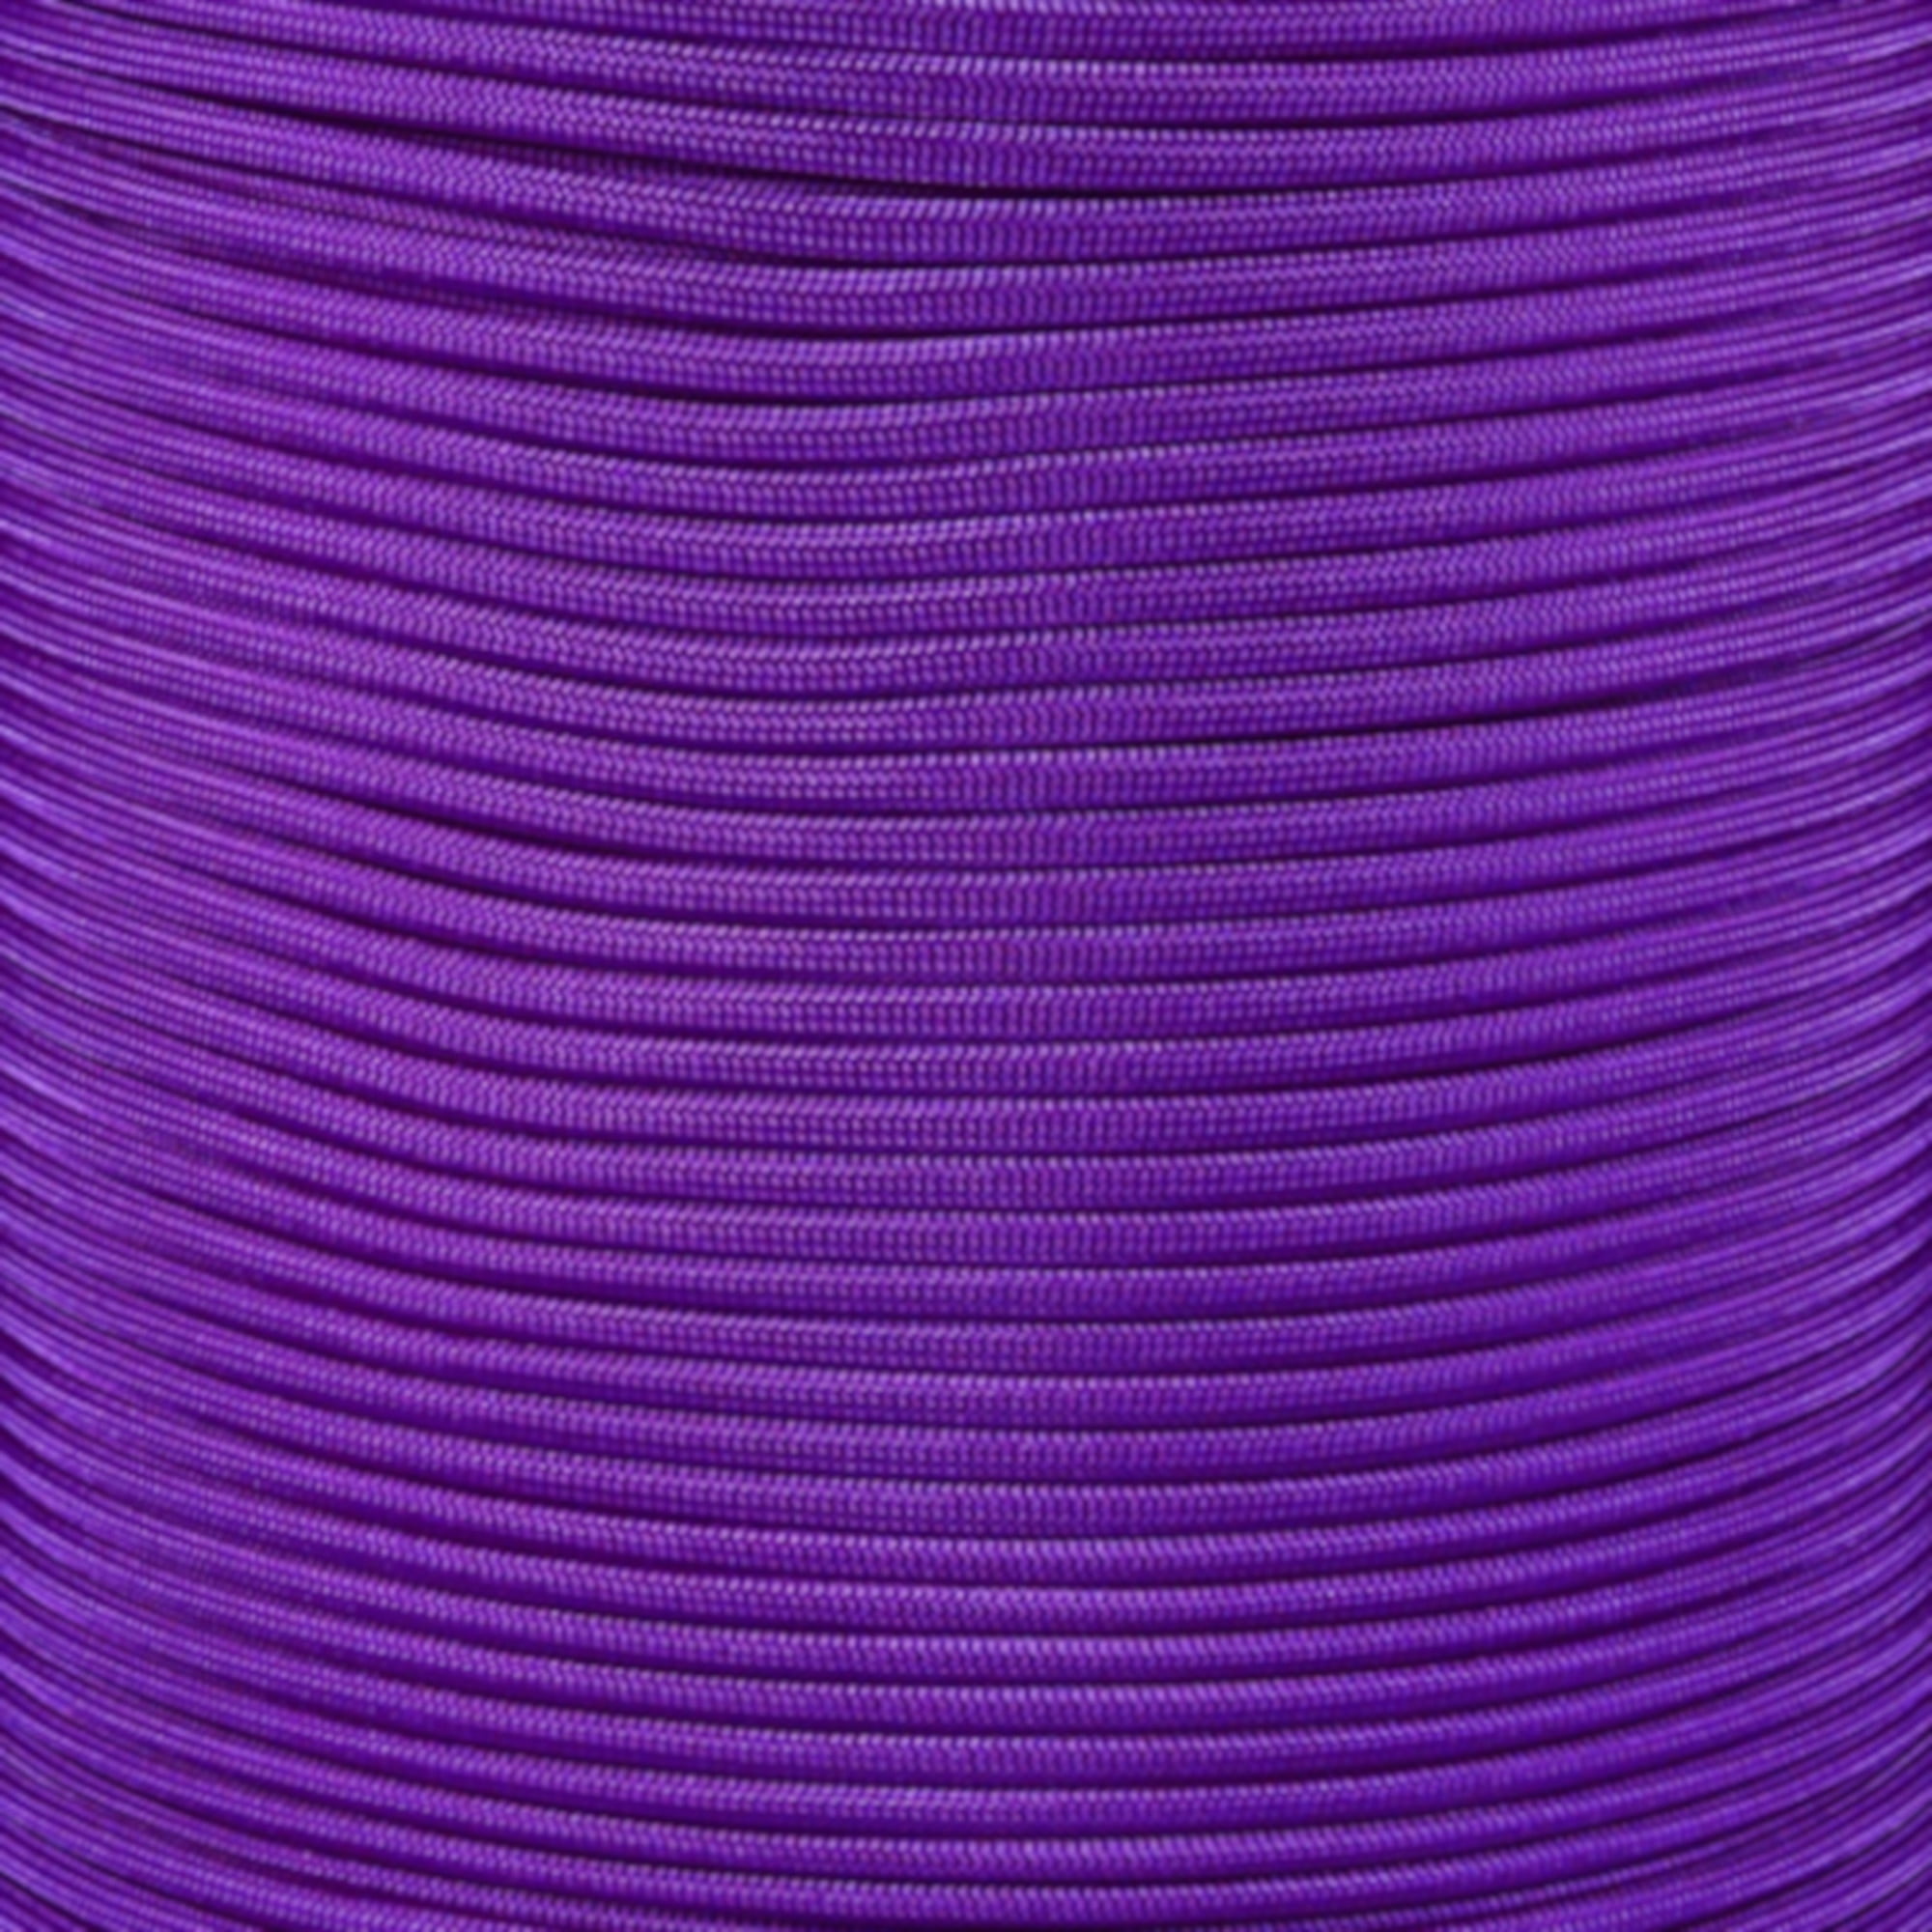 PARACORD PLANET 10 100 Hanks & 250 1000 Spools of Parachute 550 Cord Type III 7 Strand Paracord Over 200 Colors 20' 25' 50' 100' Hanks & 250' 25 50 20